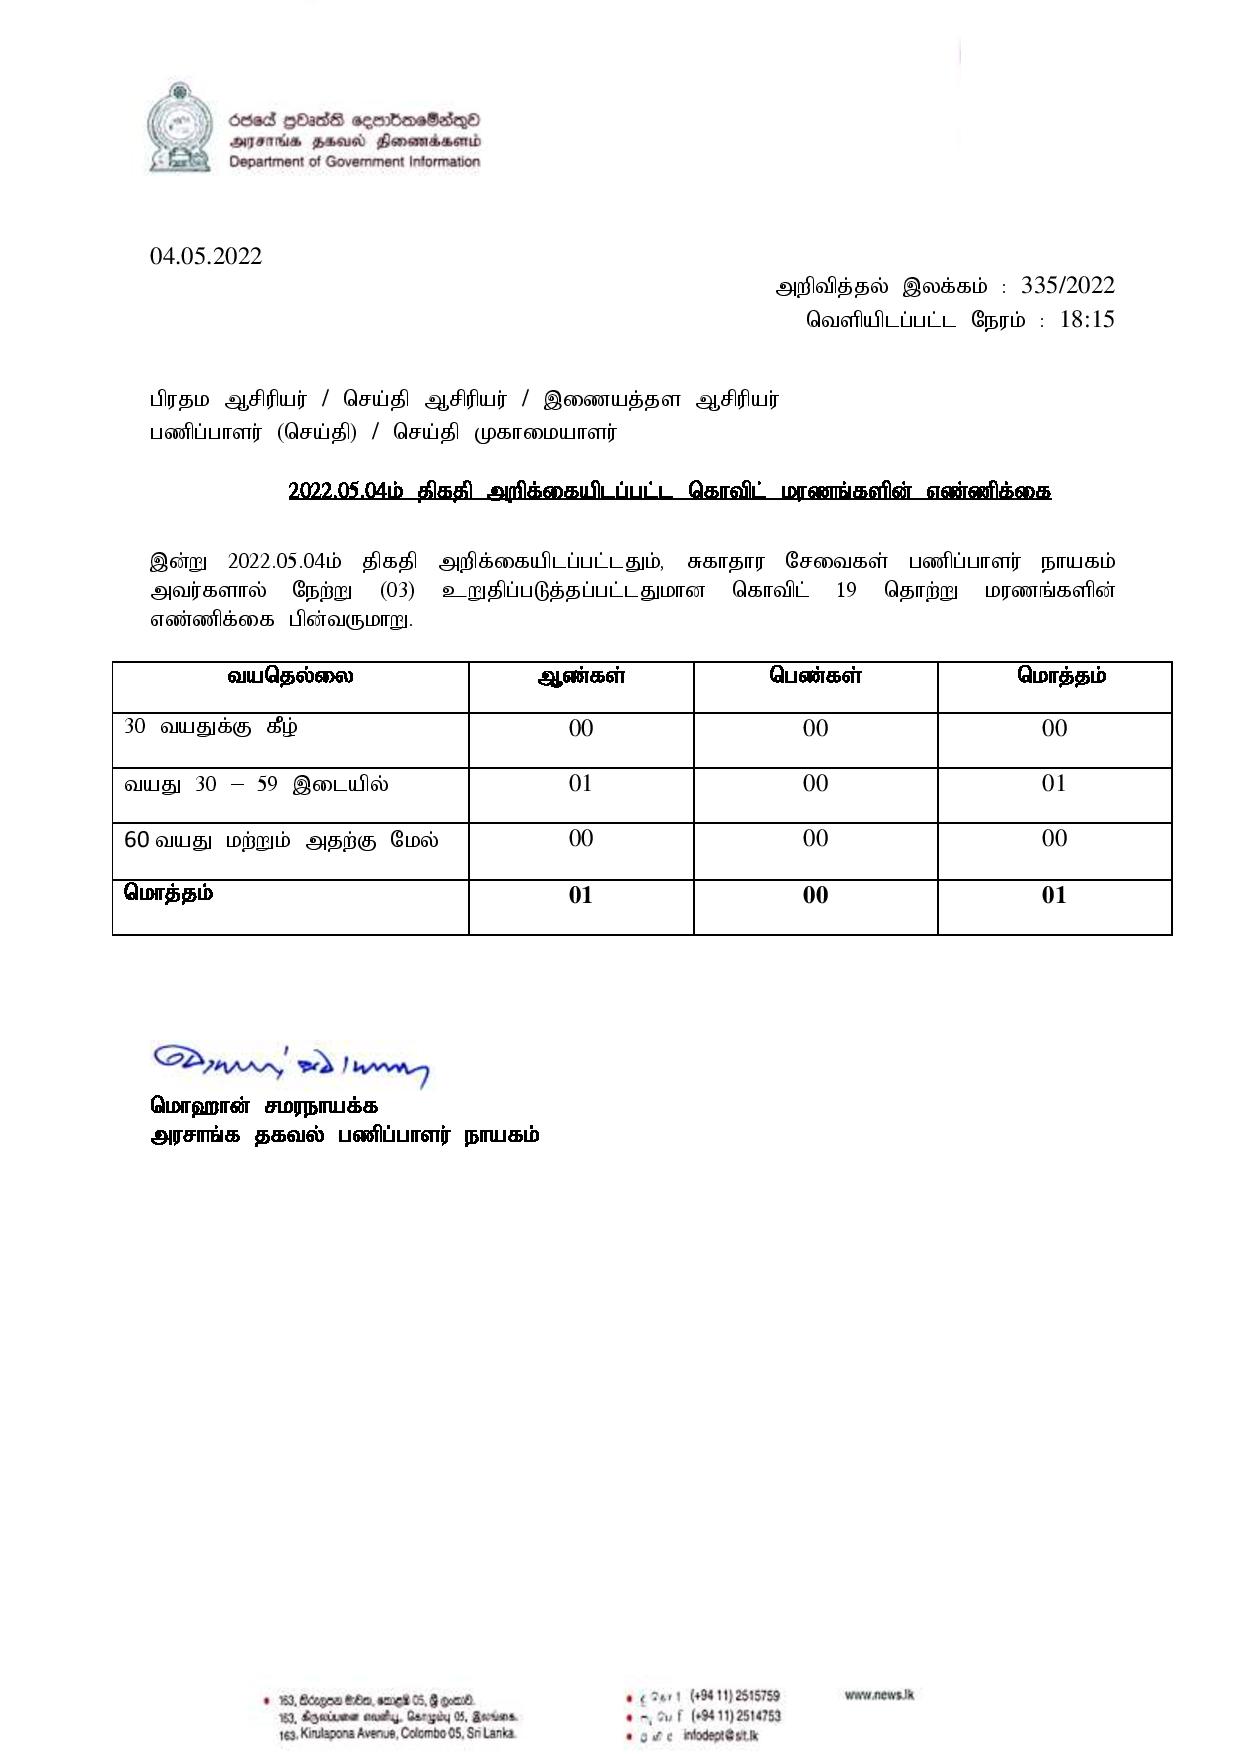 Release No 335 Tamil page 001